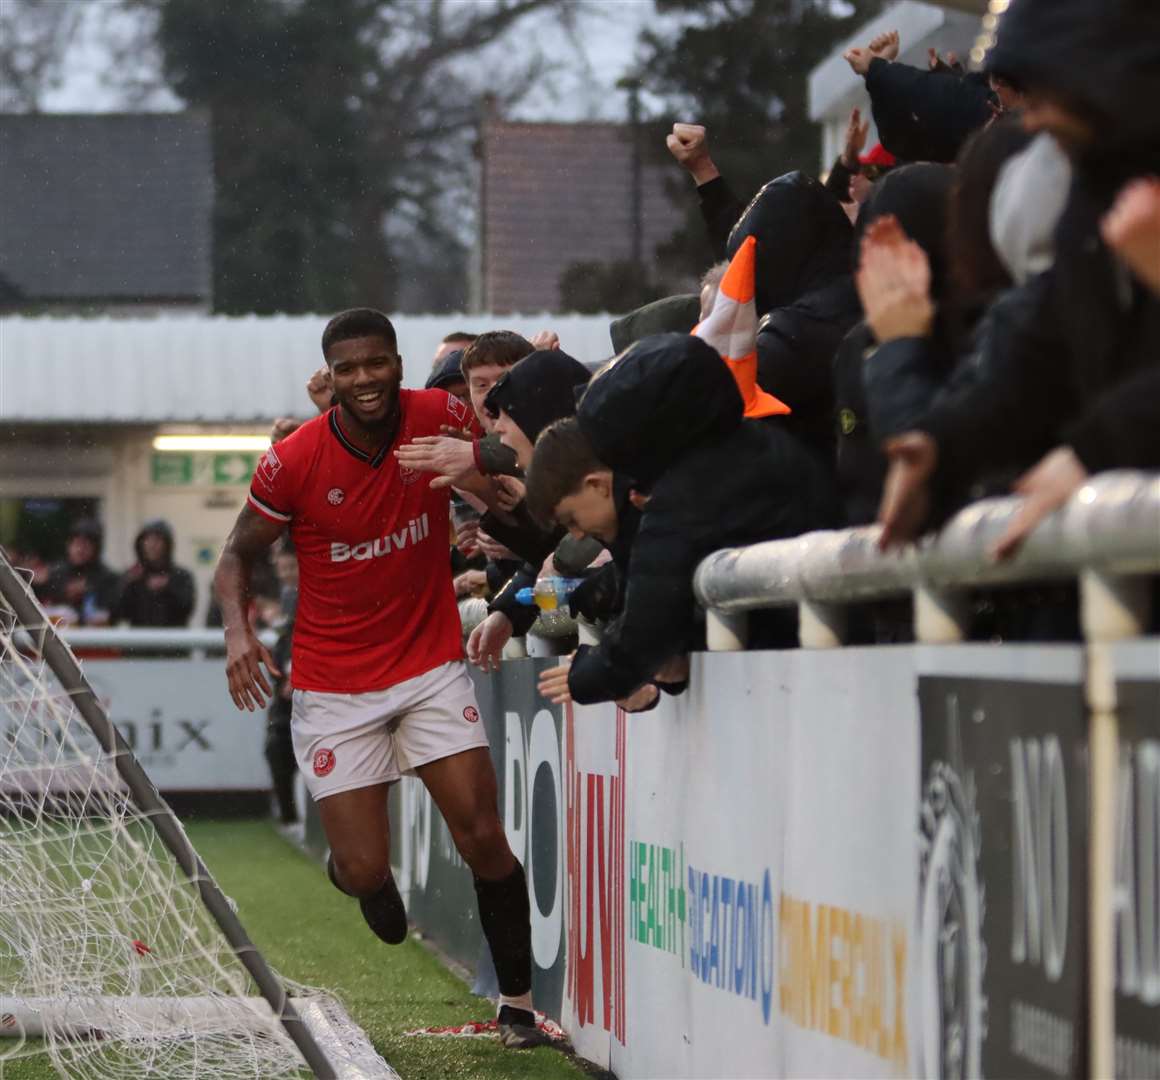 Striker Rowan Liburd celebrates scoring the match-winning goal in Chatham’s 2-1 Isthmian Premier derby win over Margate on Saturday. Picture: Max English (@max_ePhotos)